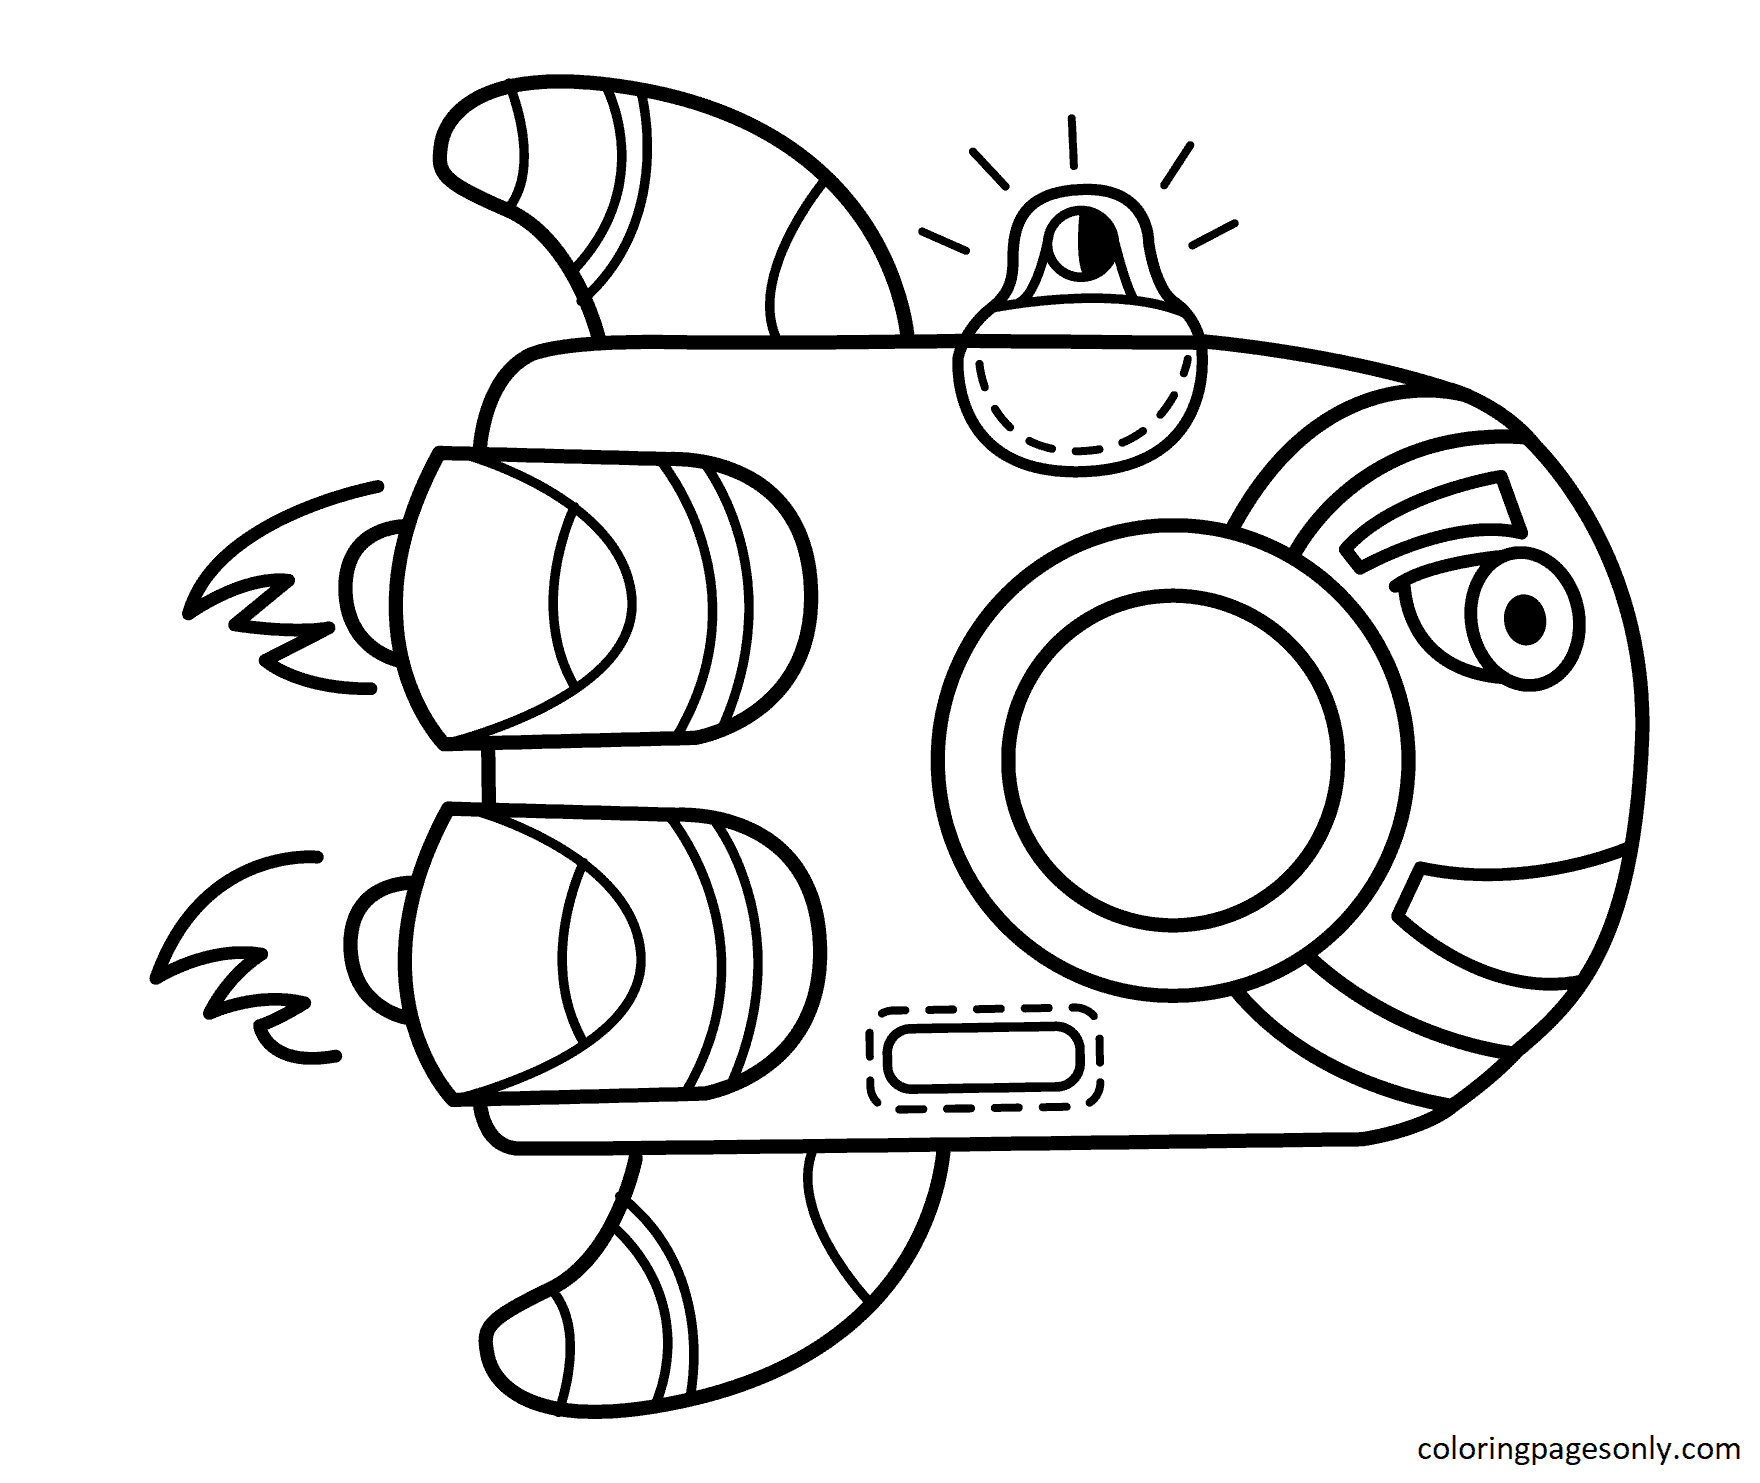 Funny Rocket Spacecraft Coloring Pages